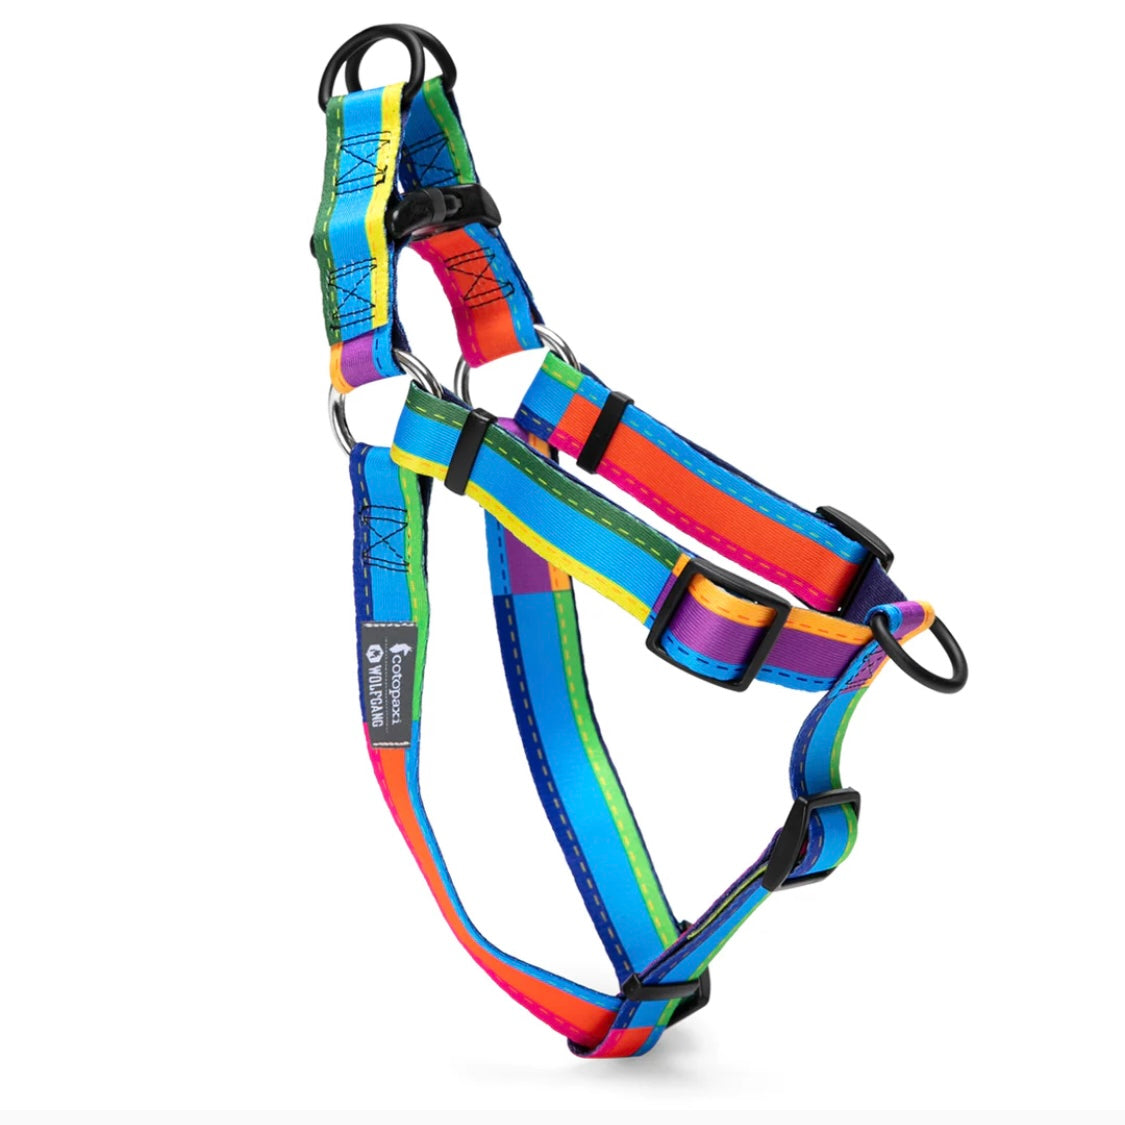 Wolfgang USA Good Dog Step-In Harness